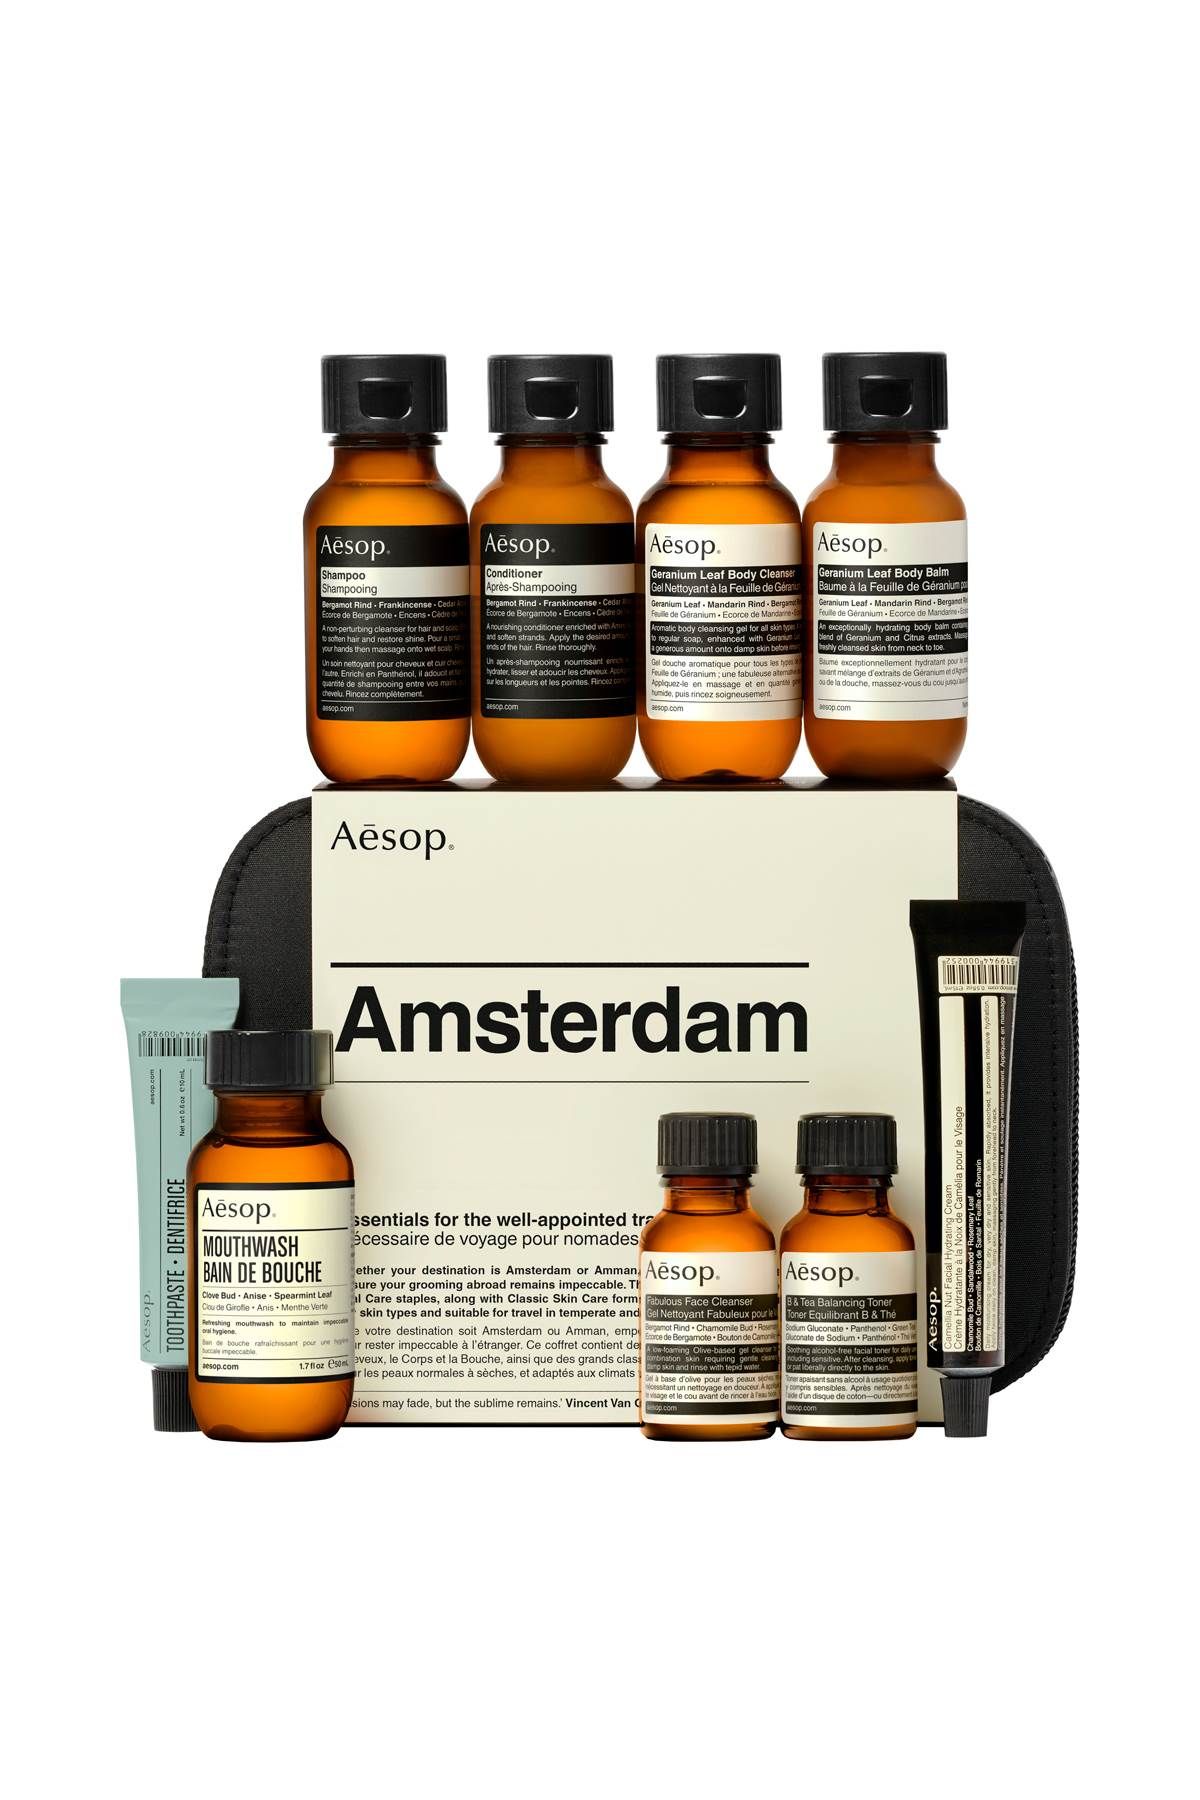 AESOP amsterdam essentials for the well-appointed traveller - 10ml 3x15ml 5x50ml